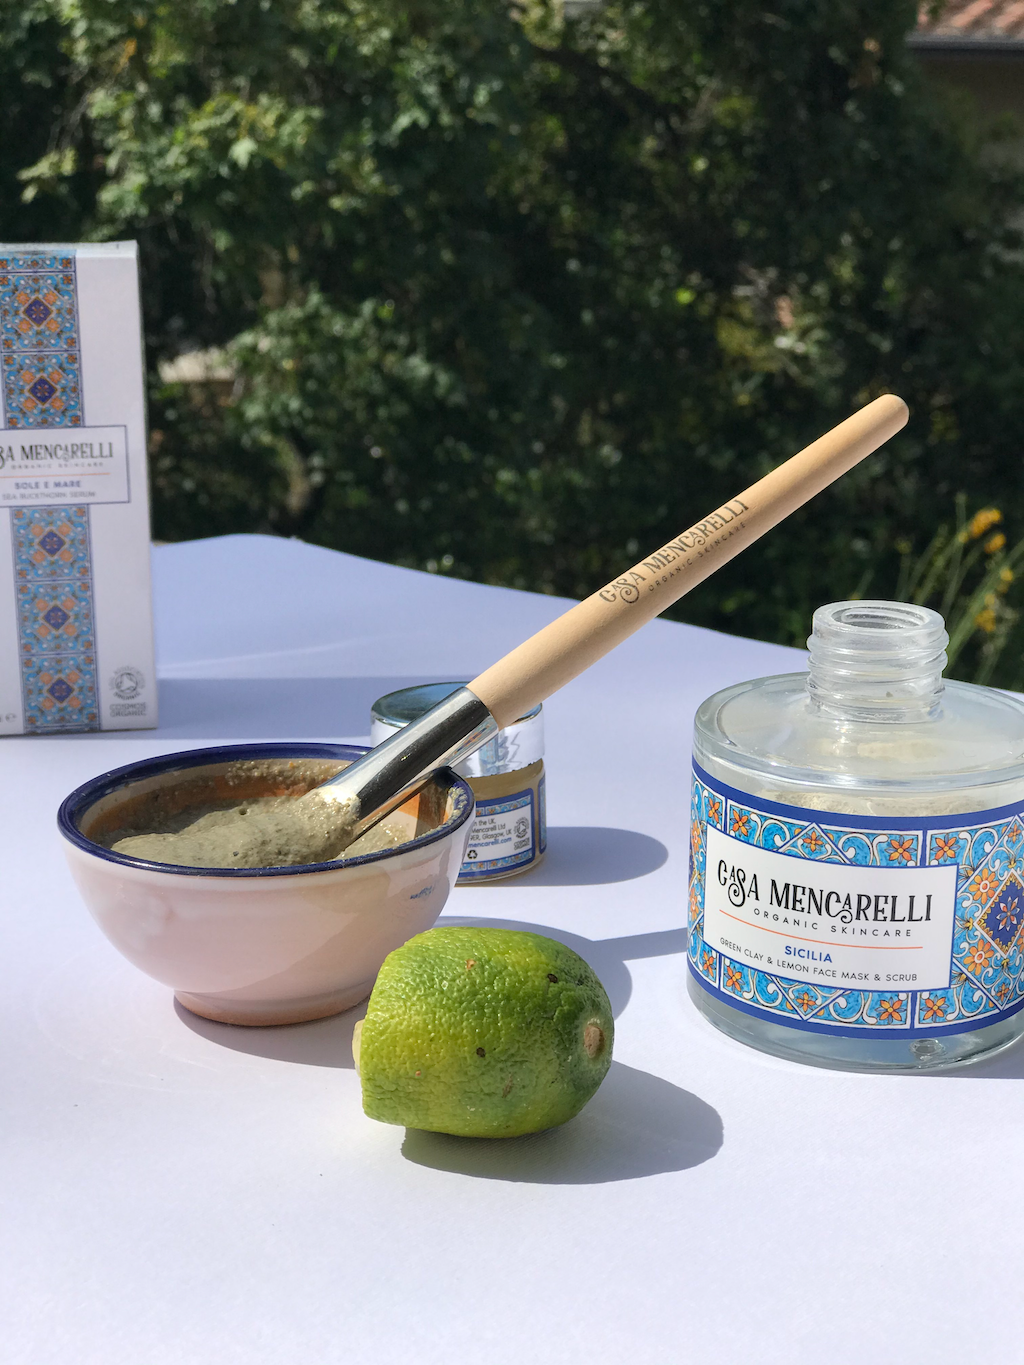 Casa Mencarelli Sicilia Green Clay & Lemon Face Mask & Scrub. Vegan face exfoliator. The glass jar is pictured open next to a mask bowl with a mask brush and the powder inside the bowl. A squeezed lime is sitting in front of the bowl.